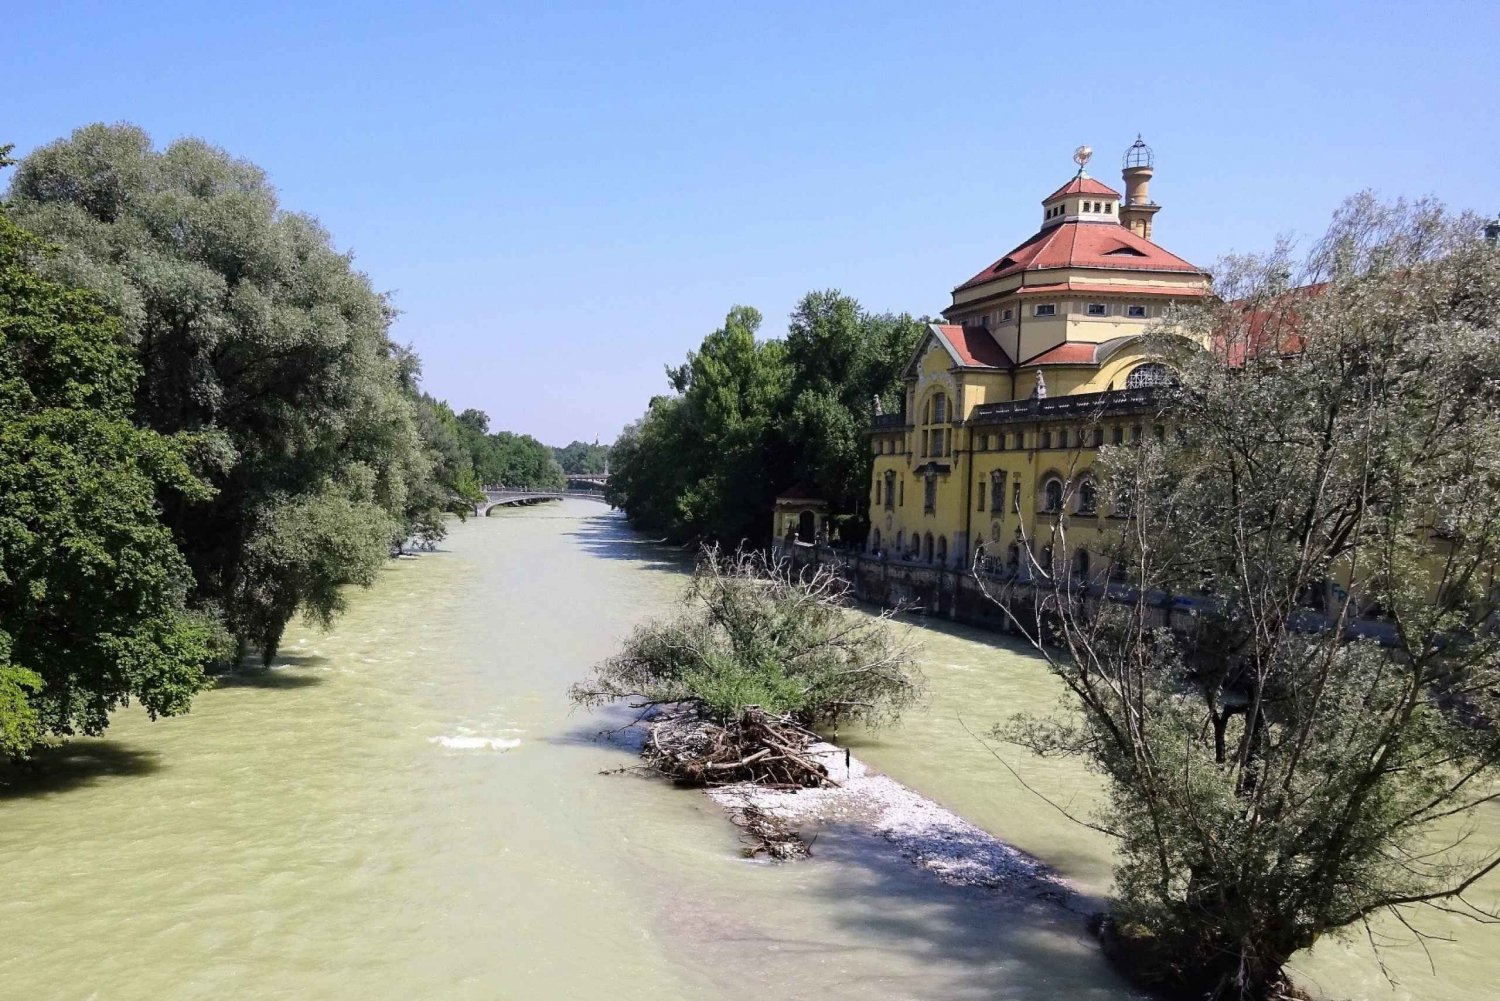 Enjoy-a-River-Cruise-on-the-Isar